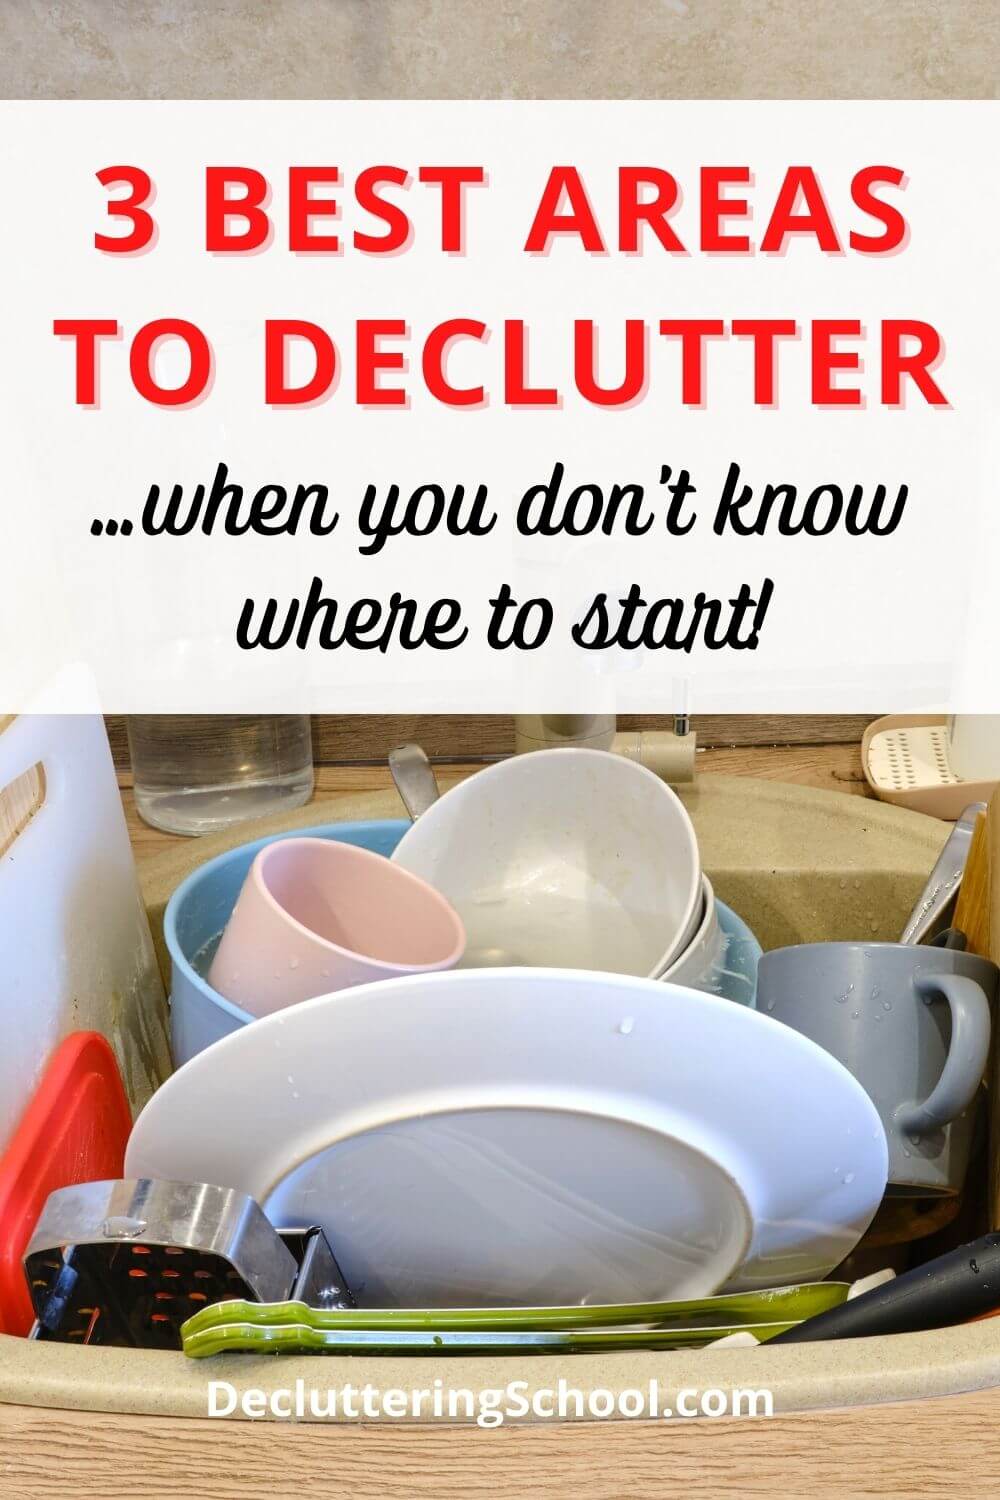 3 best areas to declutter when you don't know where to start